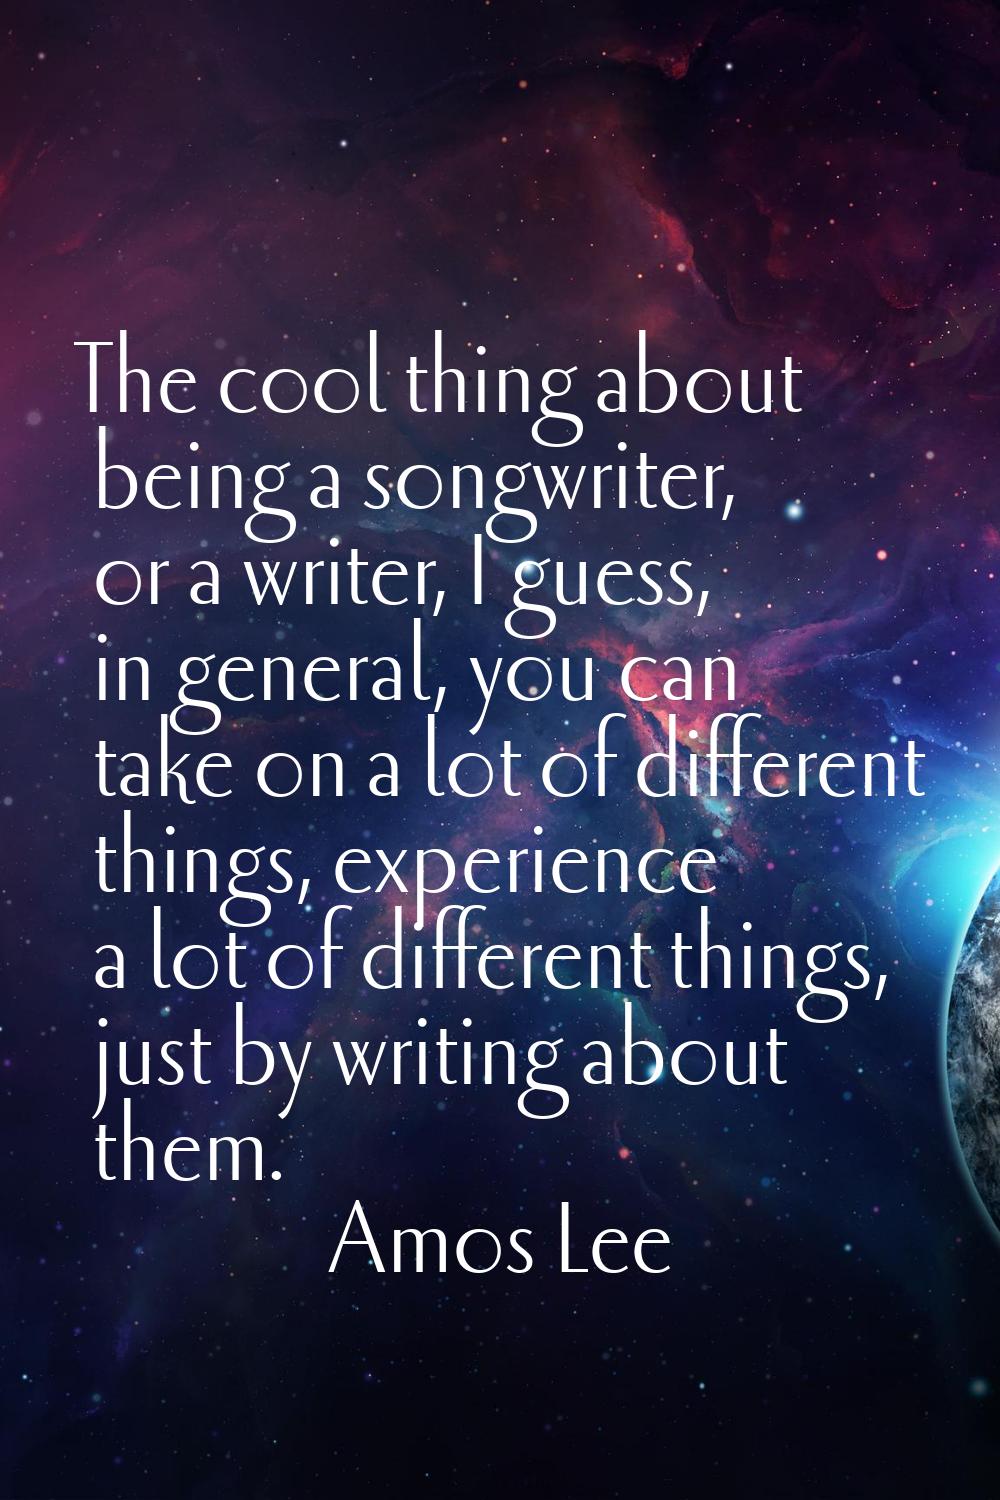 The cool thing about being a songwriter, or a writer, I guess, in general, you can take on a lot of